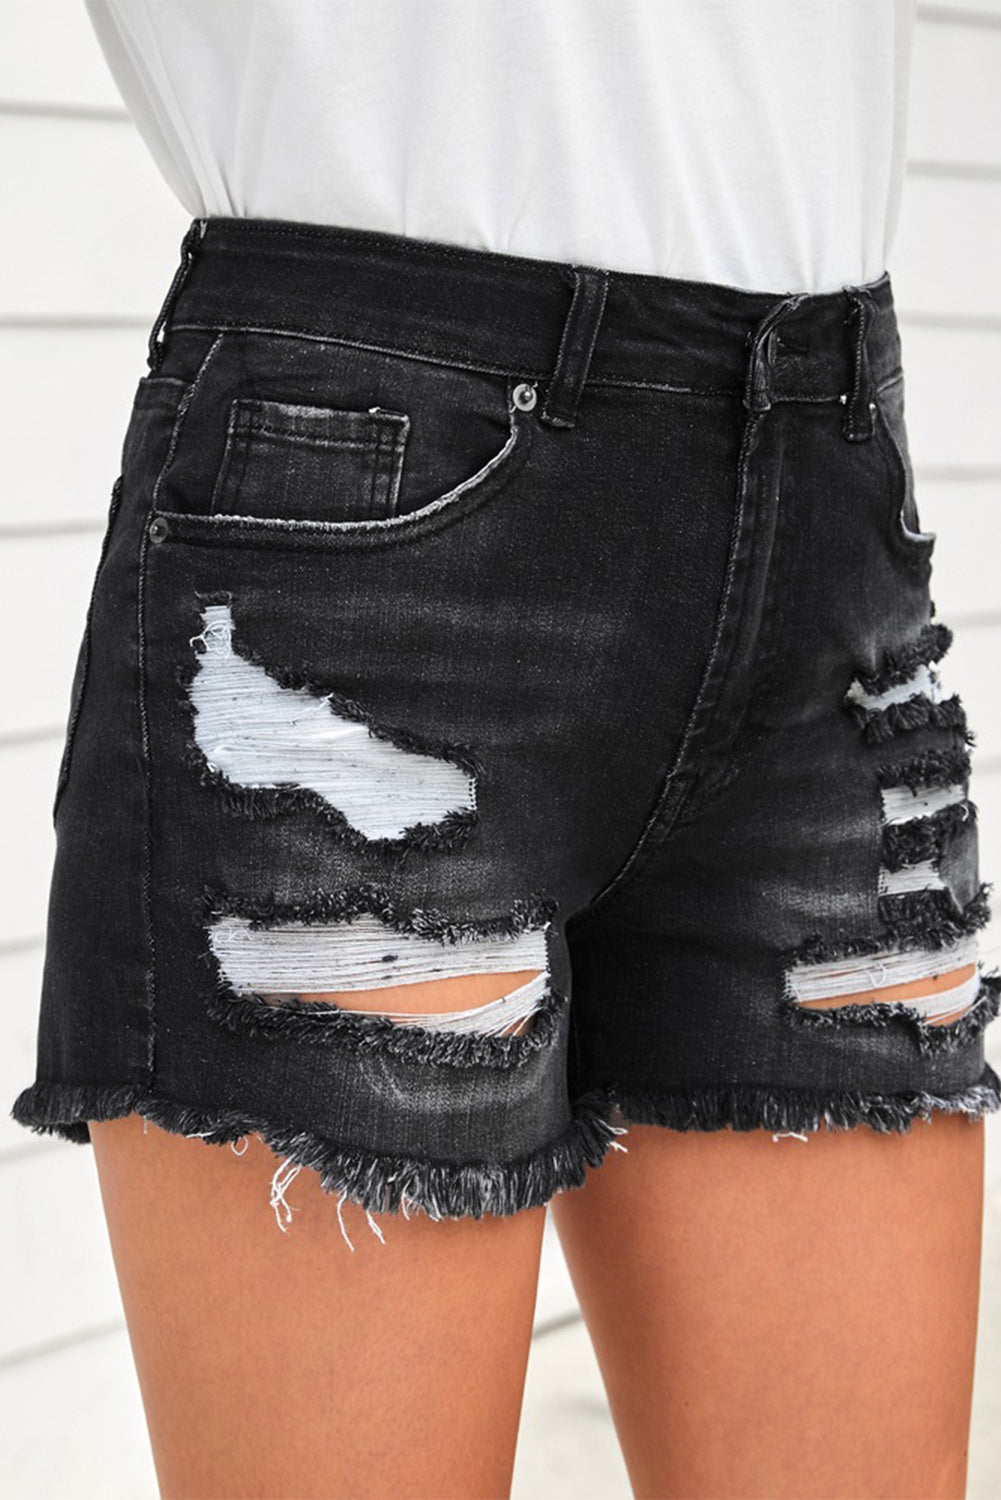 Raw Hem Distressed Denim Shorts with Pockets - Women’s Clothing & Accessories - Shorts - 2 - 2024